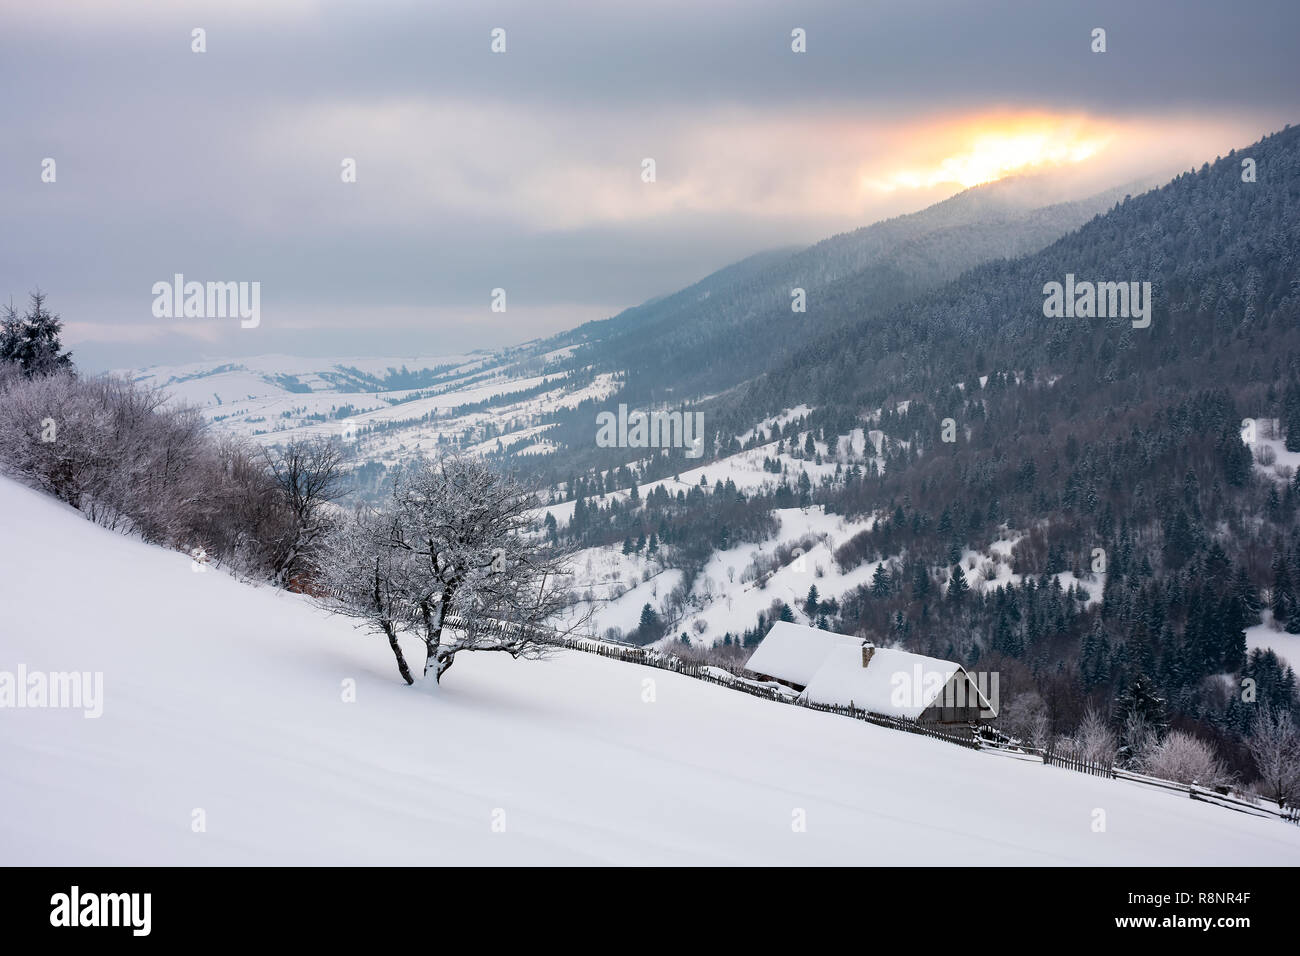 wonderful snowy countryside in mountains. tree and woodshed on a snowy slope. winter sun rise behind the ridge and cloudy sky Stock Photo